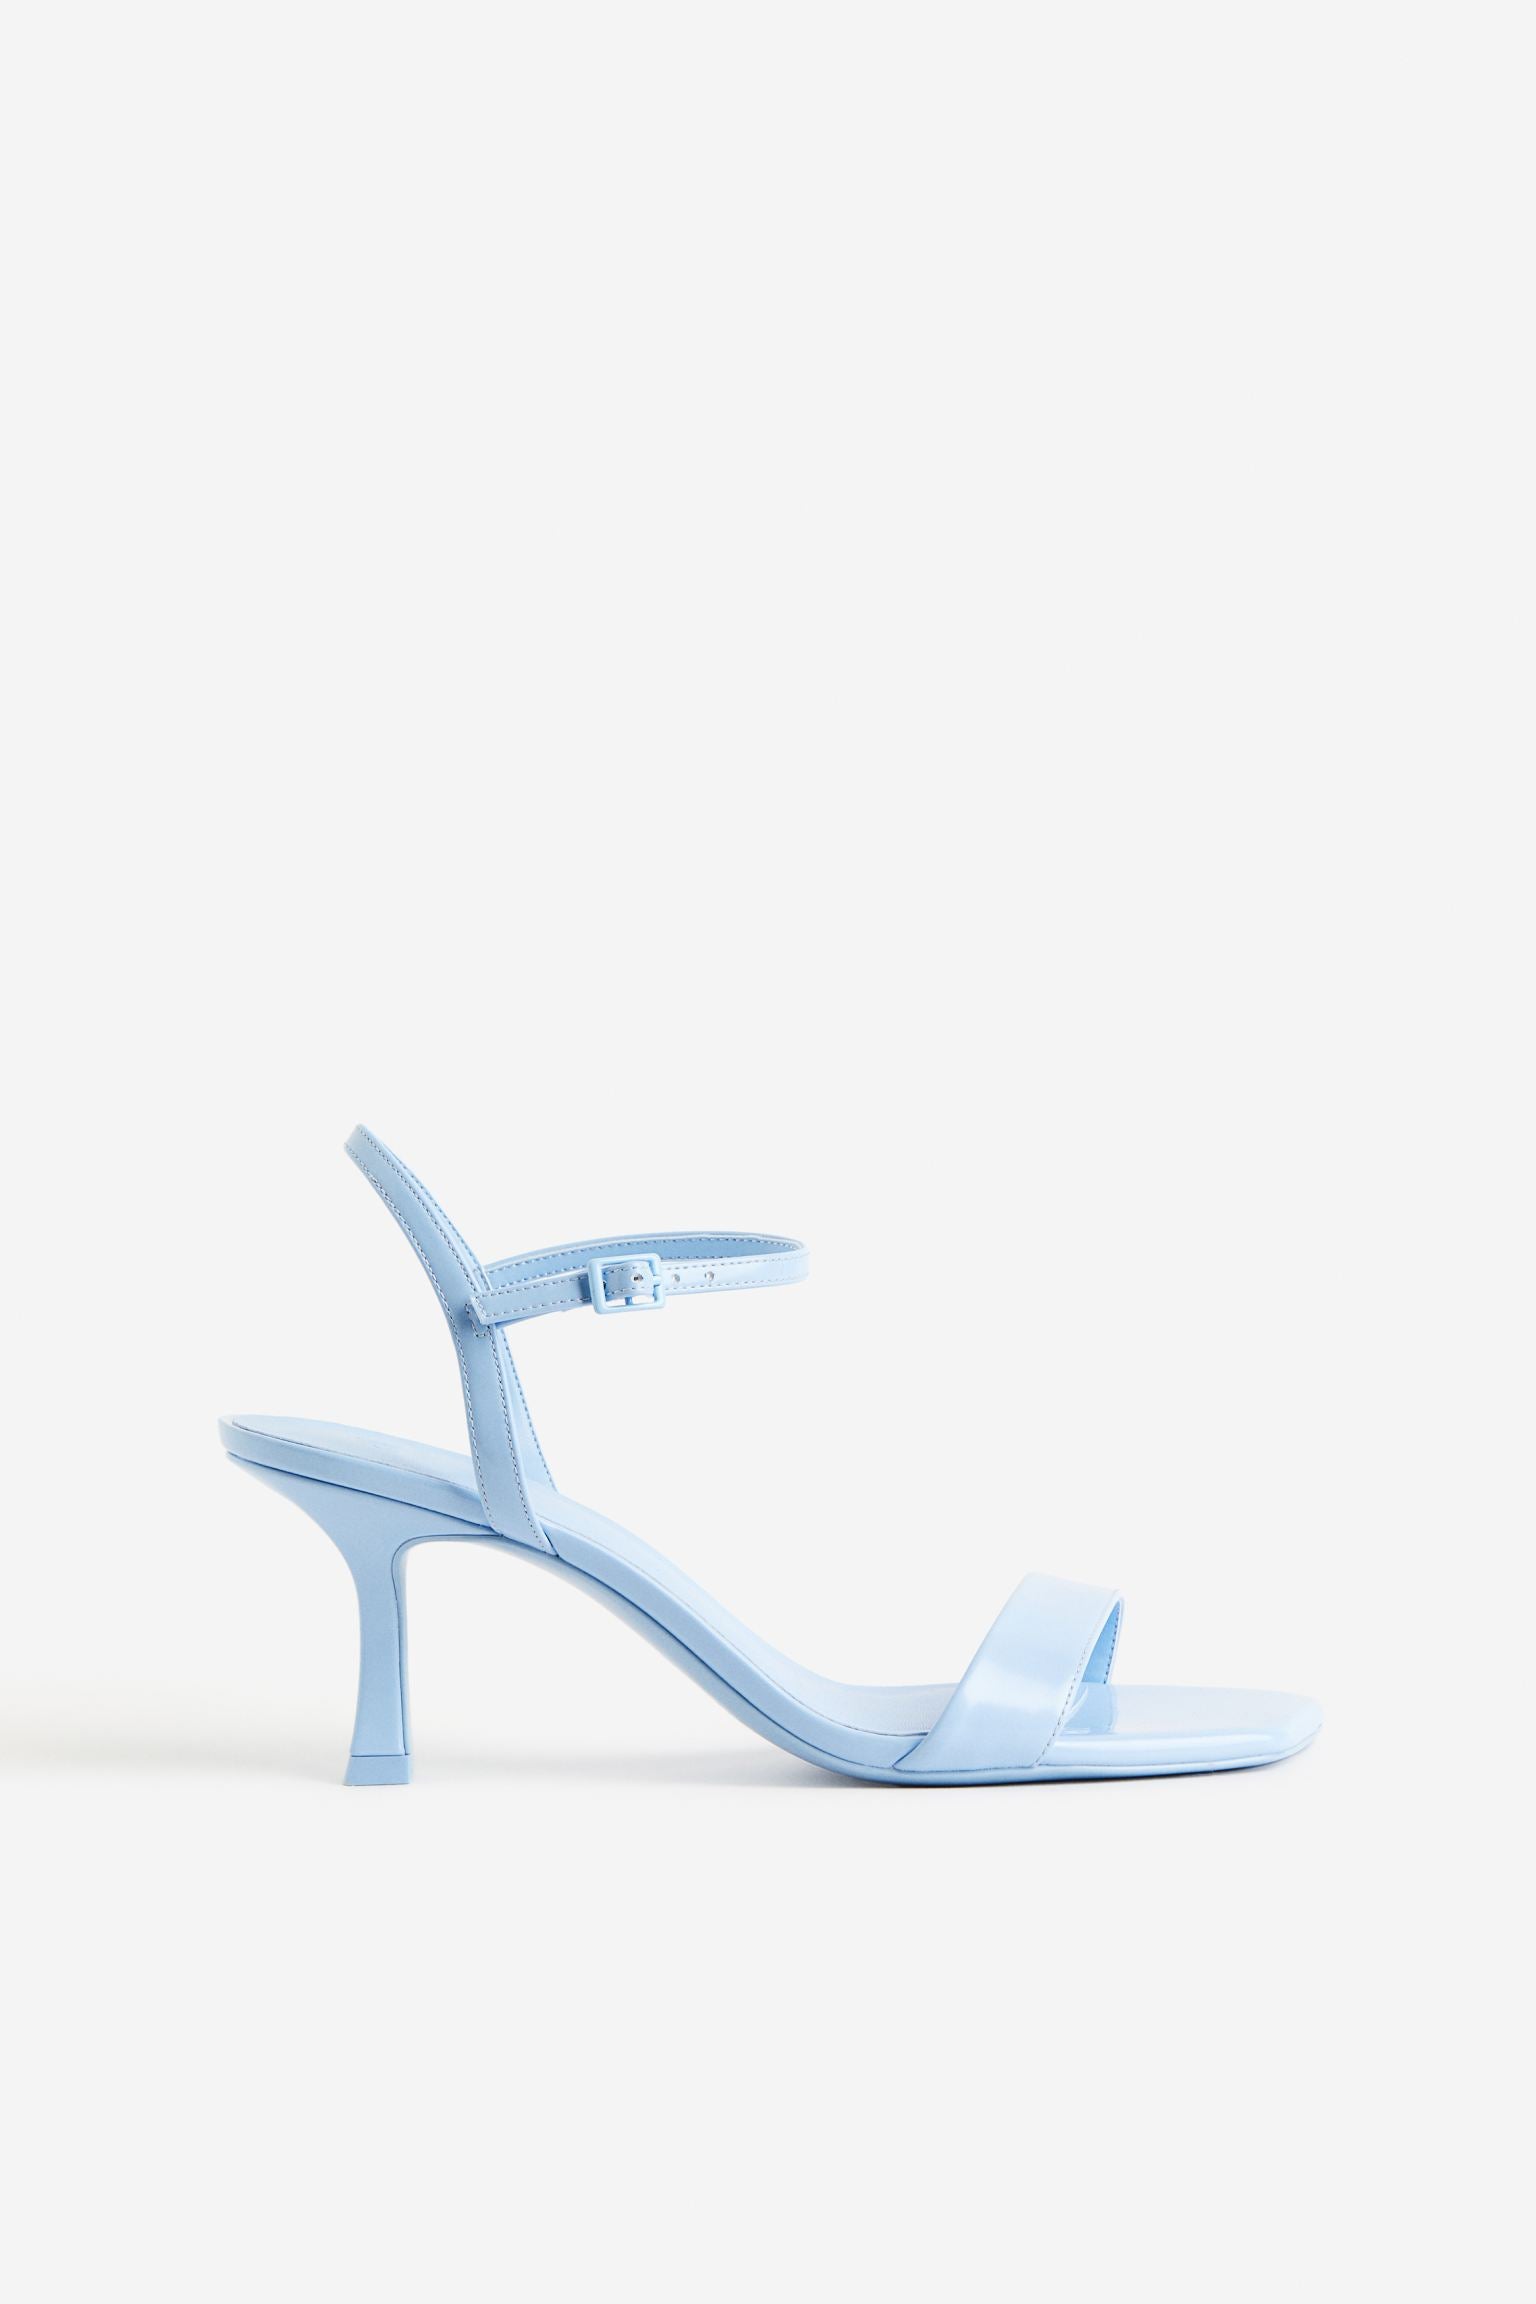 H & M BLUE BARELY THERE HEELED SANDAL